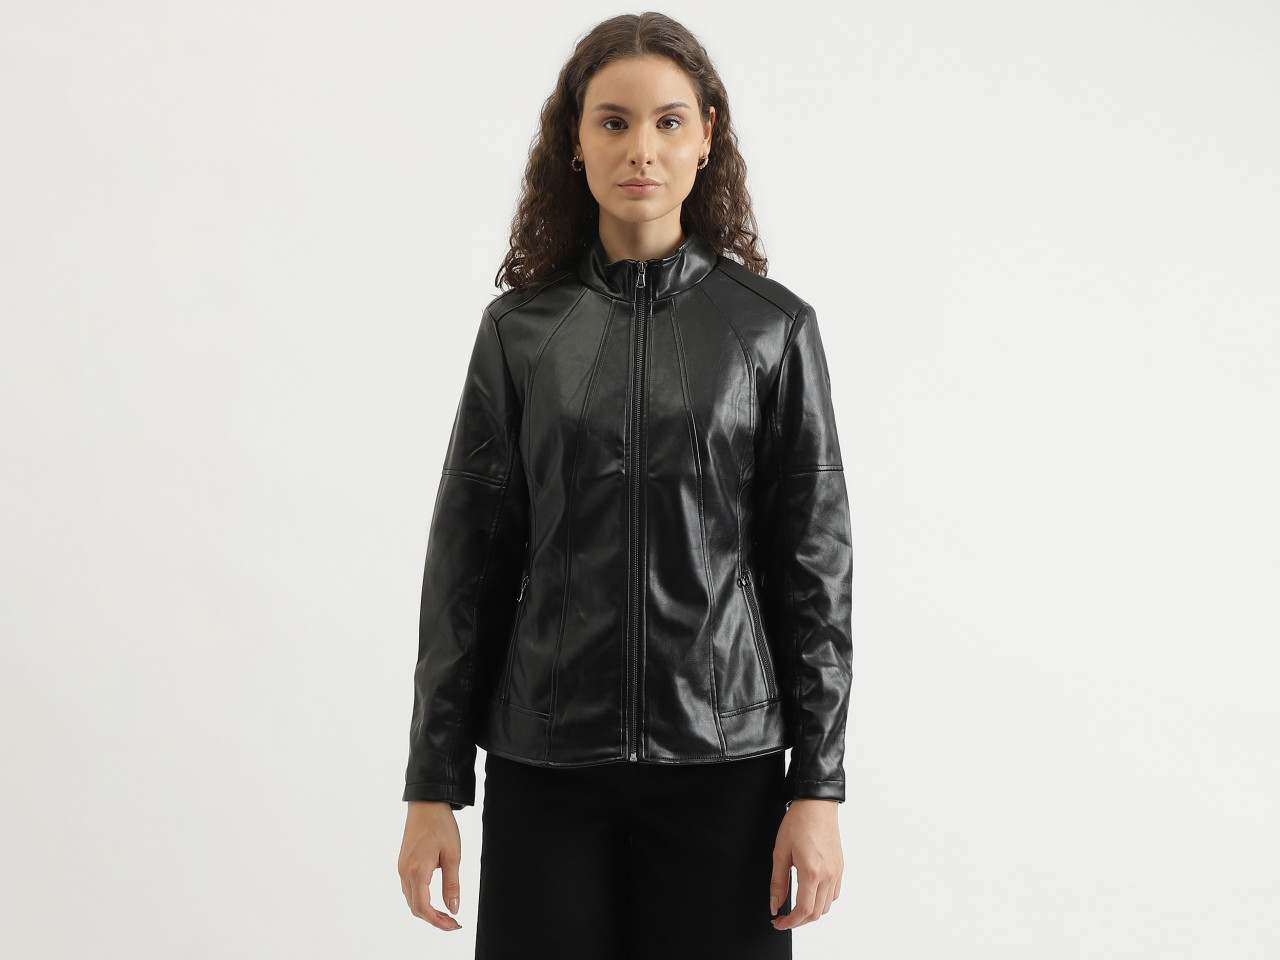 Women's Jackets and Coats Collection 2021